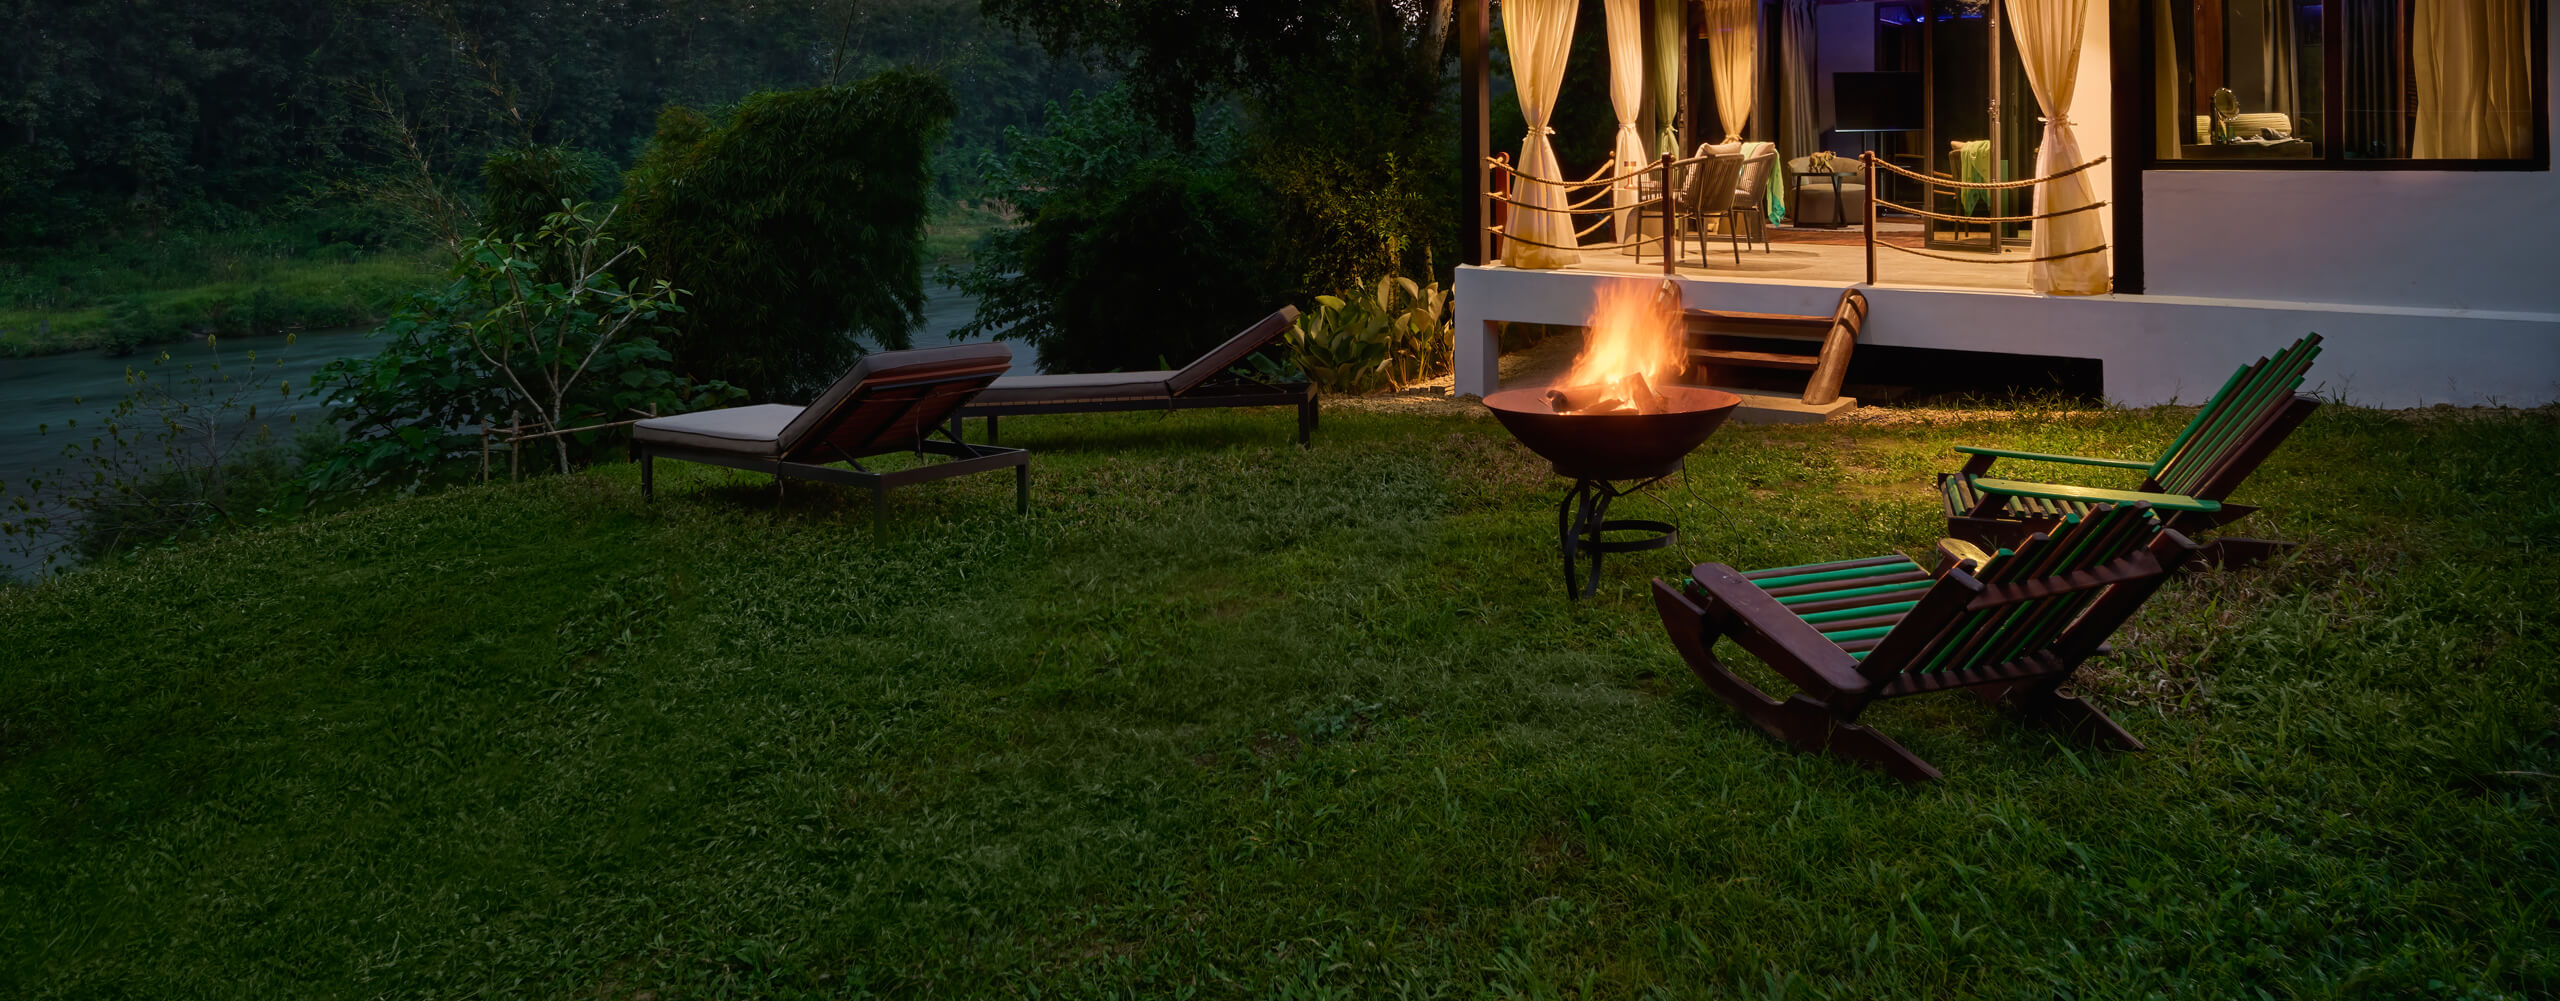 A Luang Prabang house with lawn chairs and a fire pit near a river.